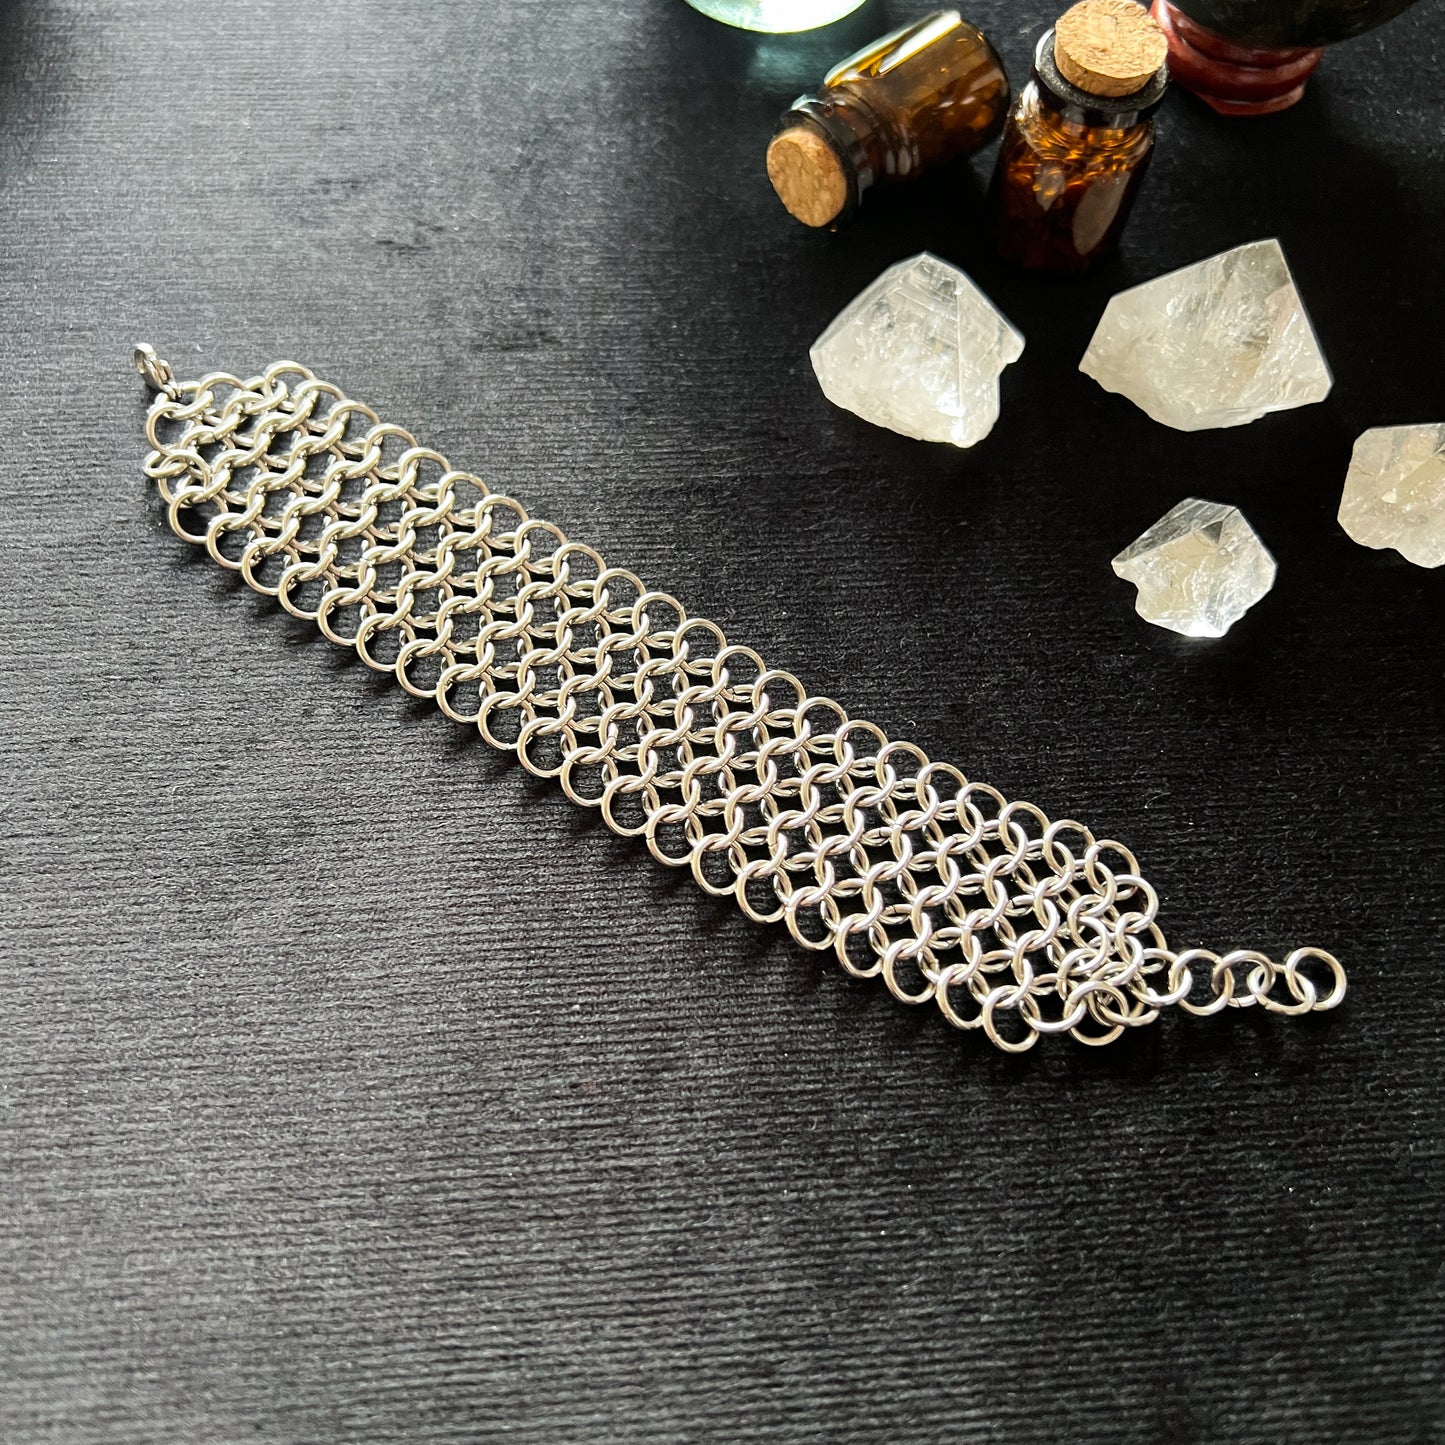 Chainmail bracelet made of stainless steel European 4 in 1 chainmaille cuff bracelet gothic jewelry